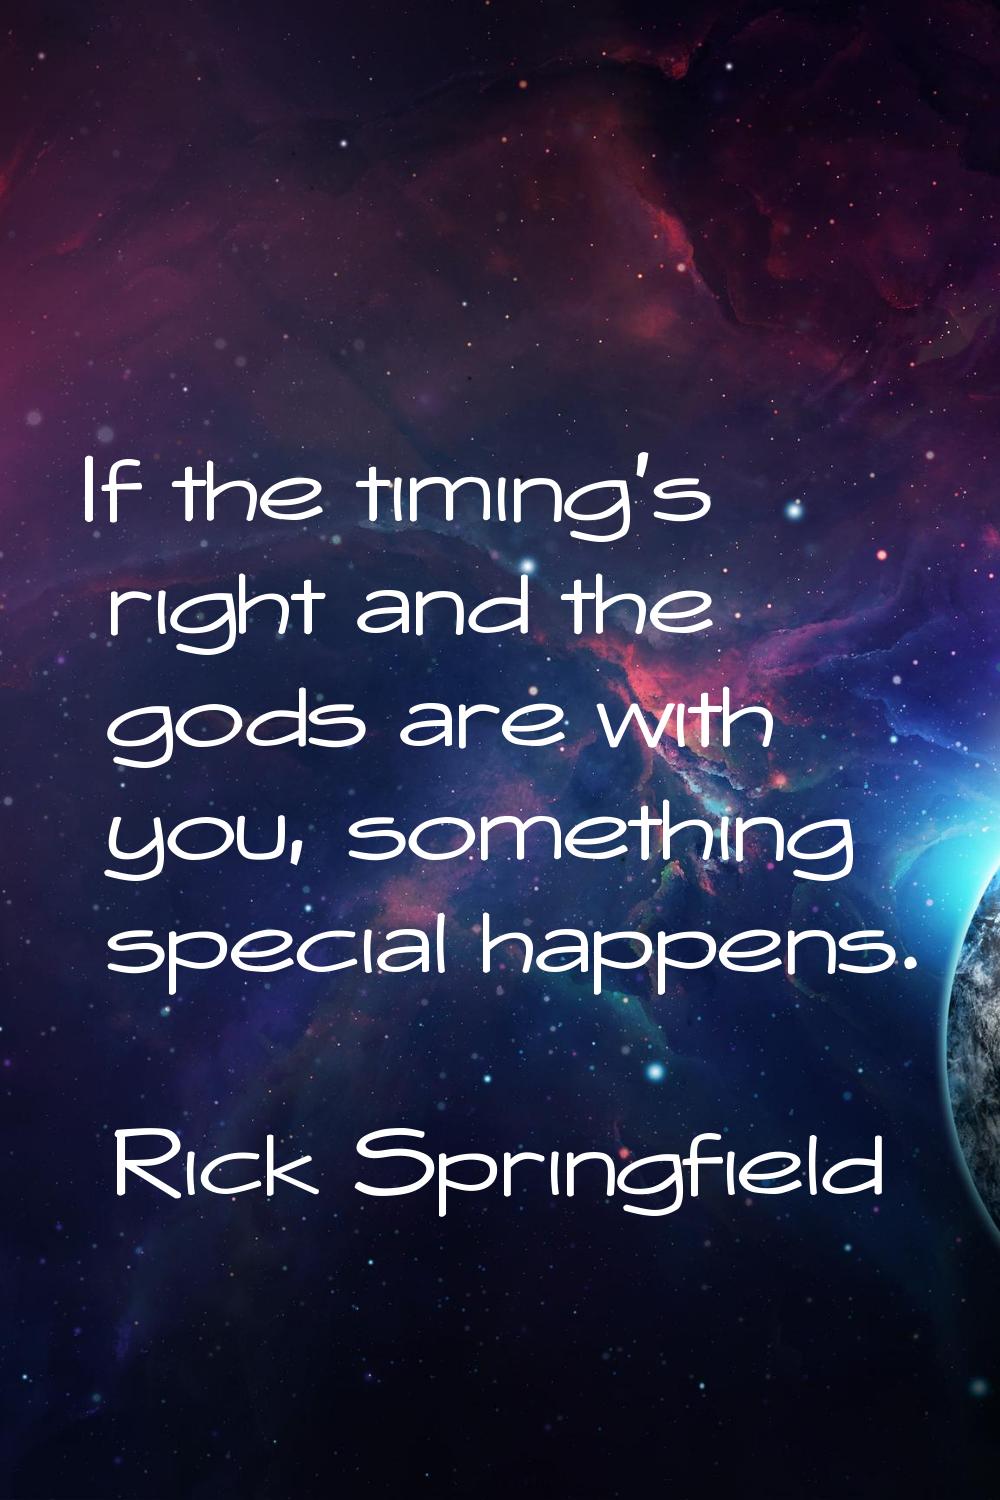 If the timing's right and the gods are with you, something special happens.